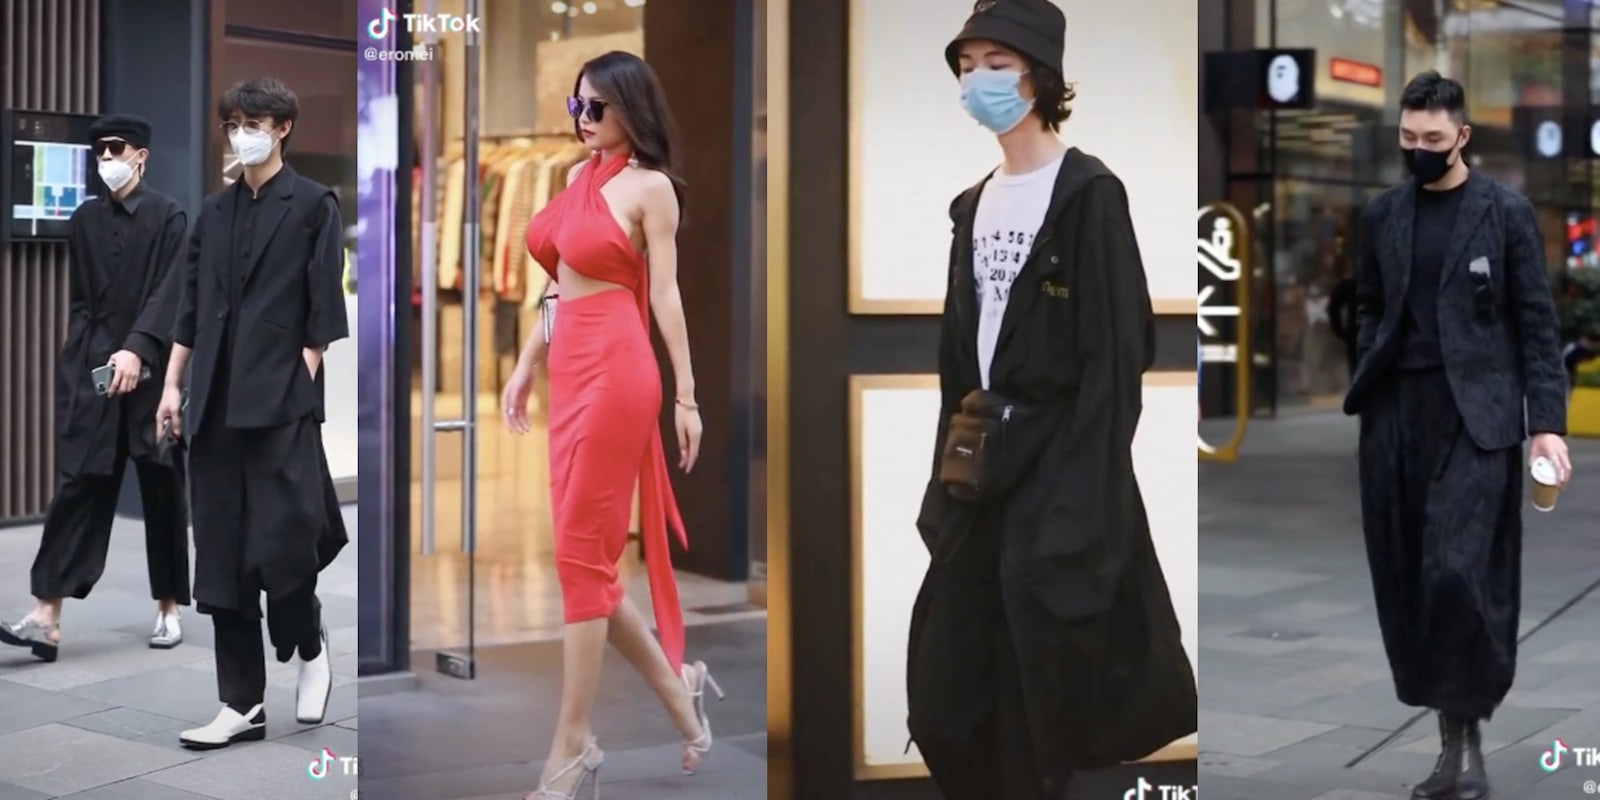 Examples of Chinese street fashion